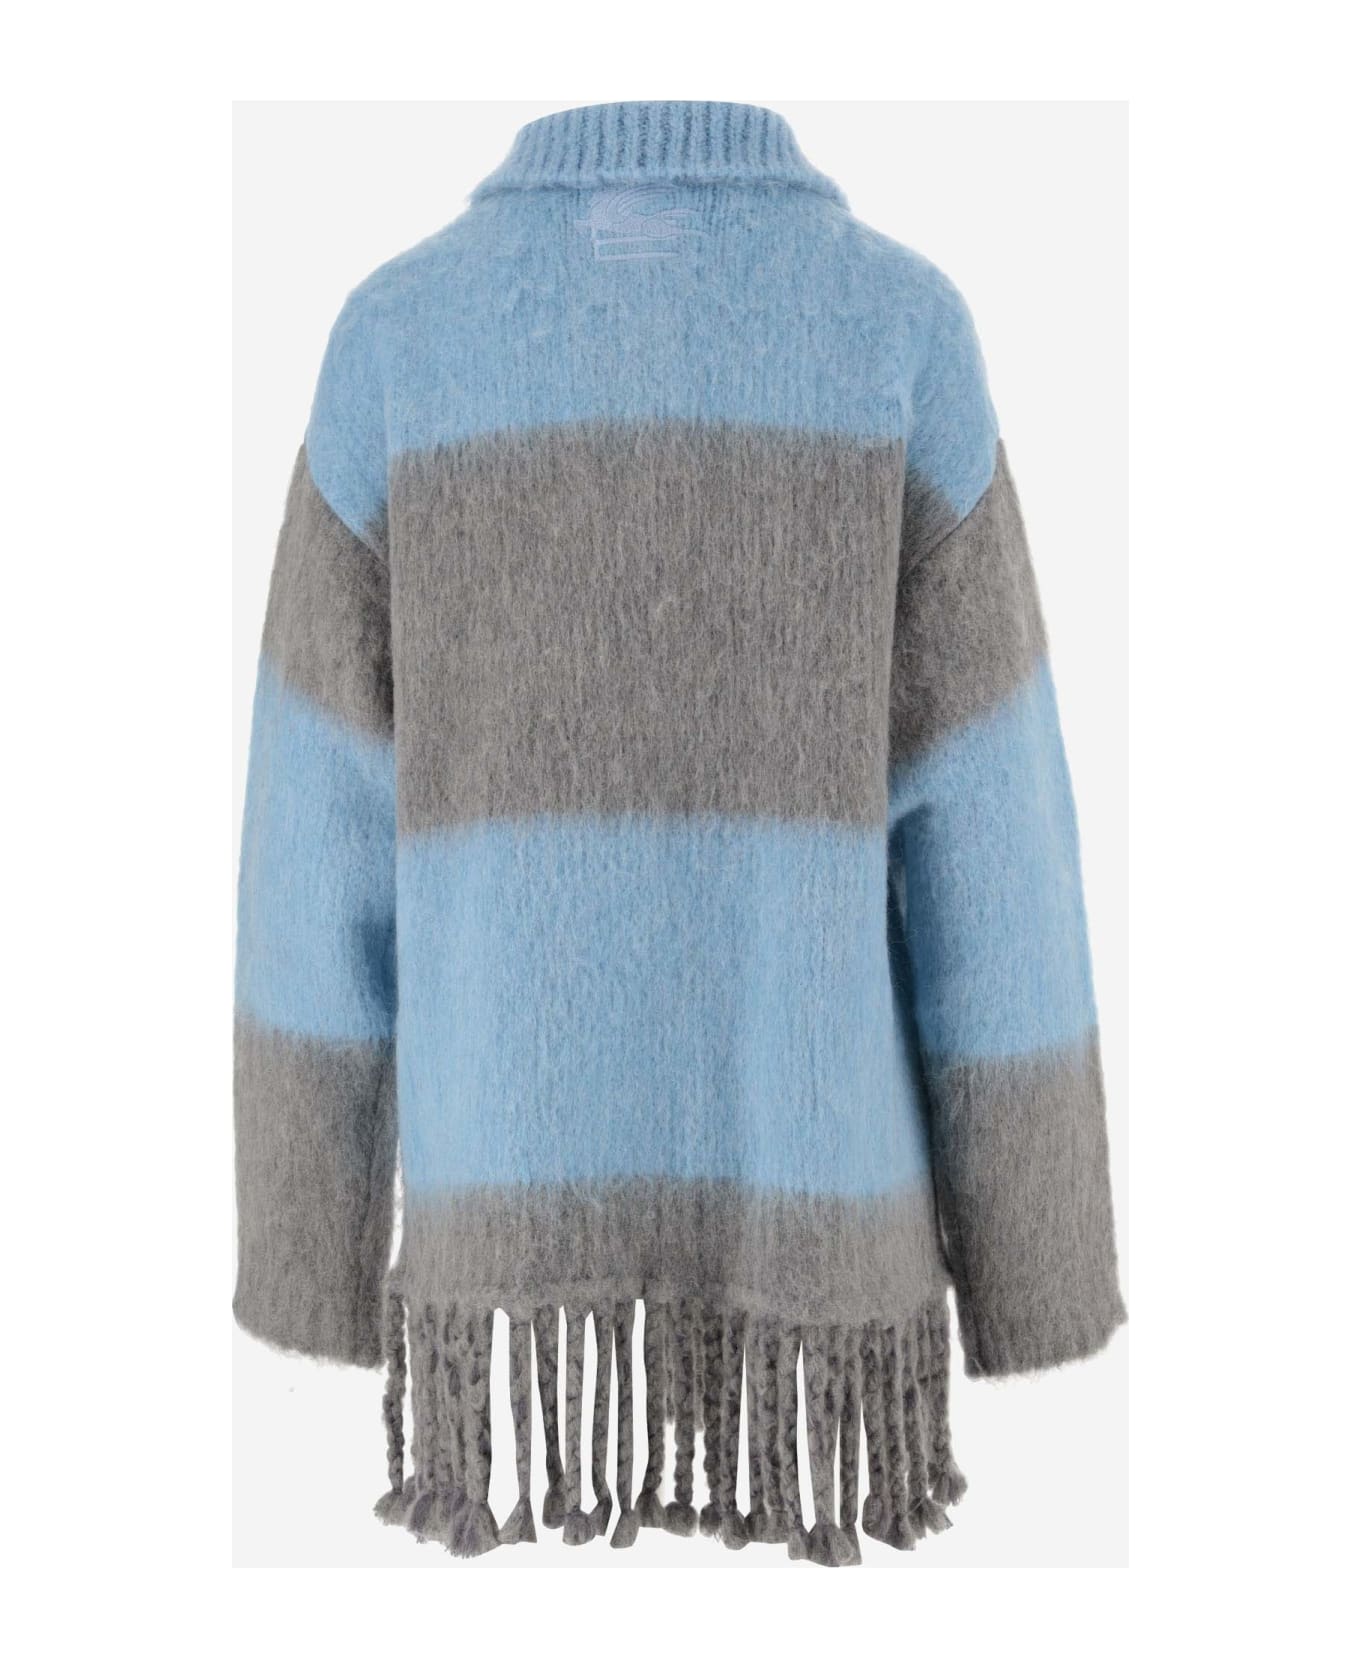 Etro Fringed Striped Long Sweater - Red